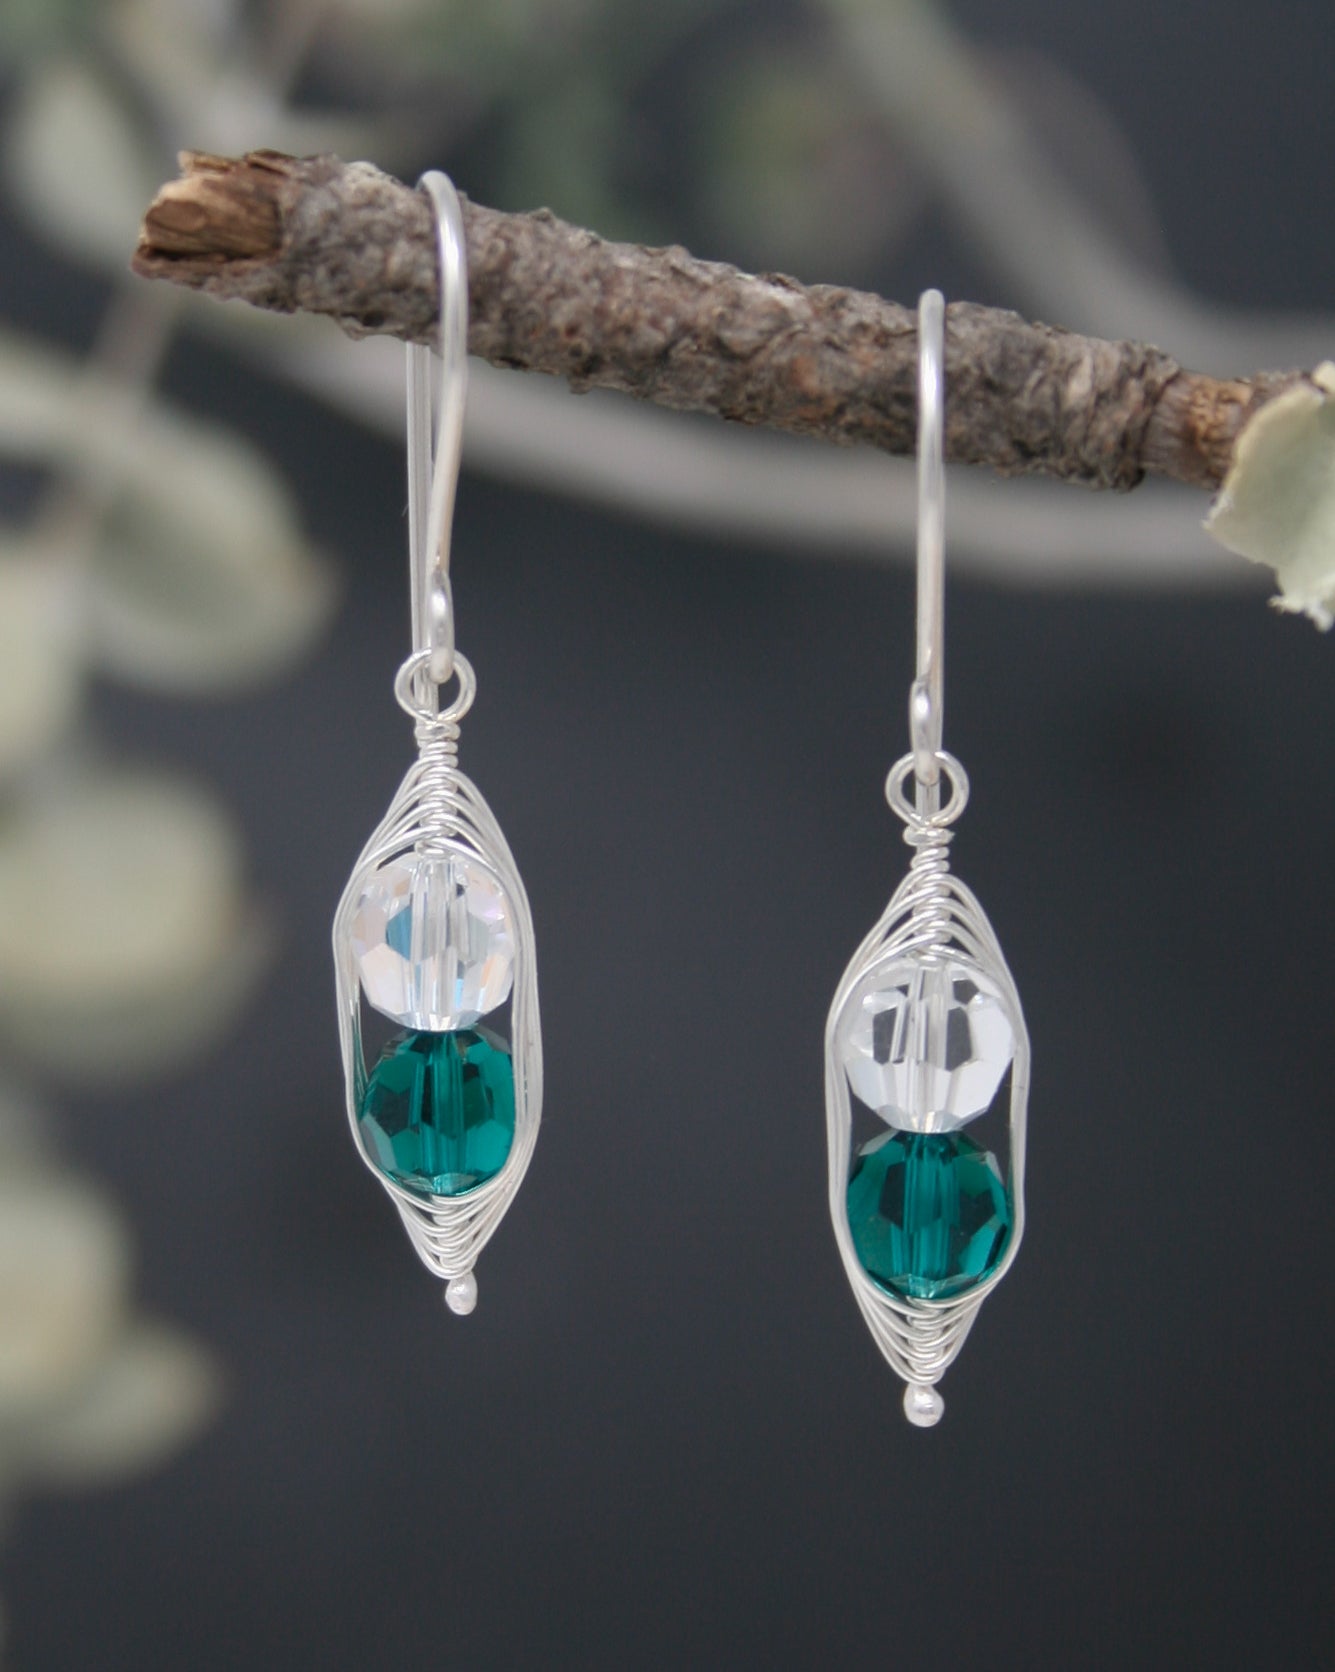 Birthstone Pea pod earrings with Crystals [made to order]